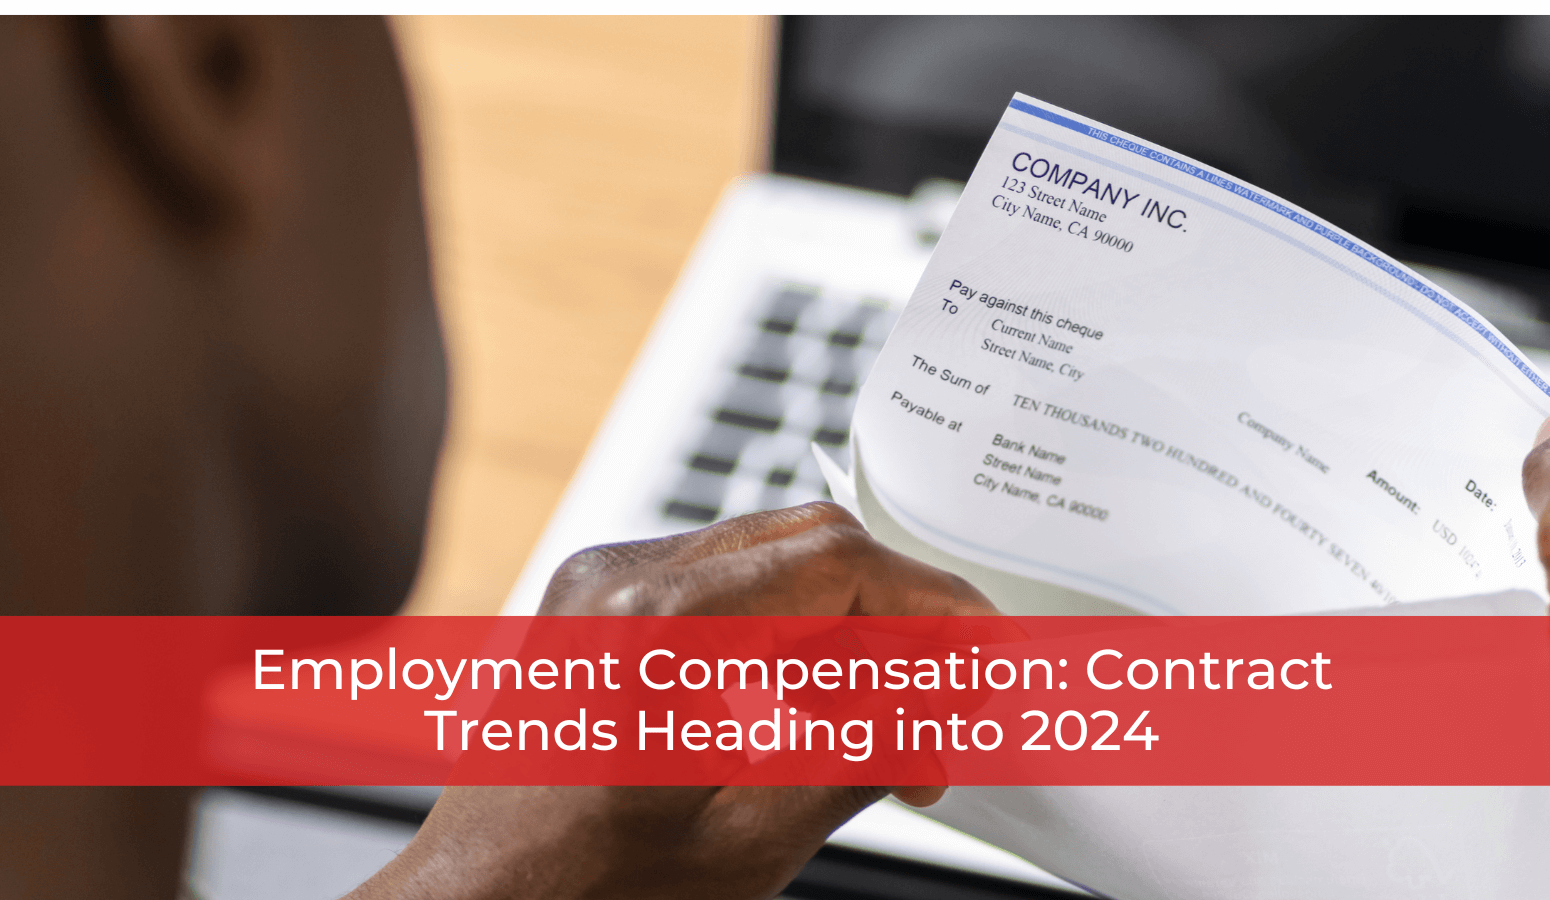 Featured image for “Employment Compensation: Contract Trends Heading into 2024”